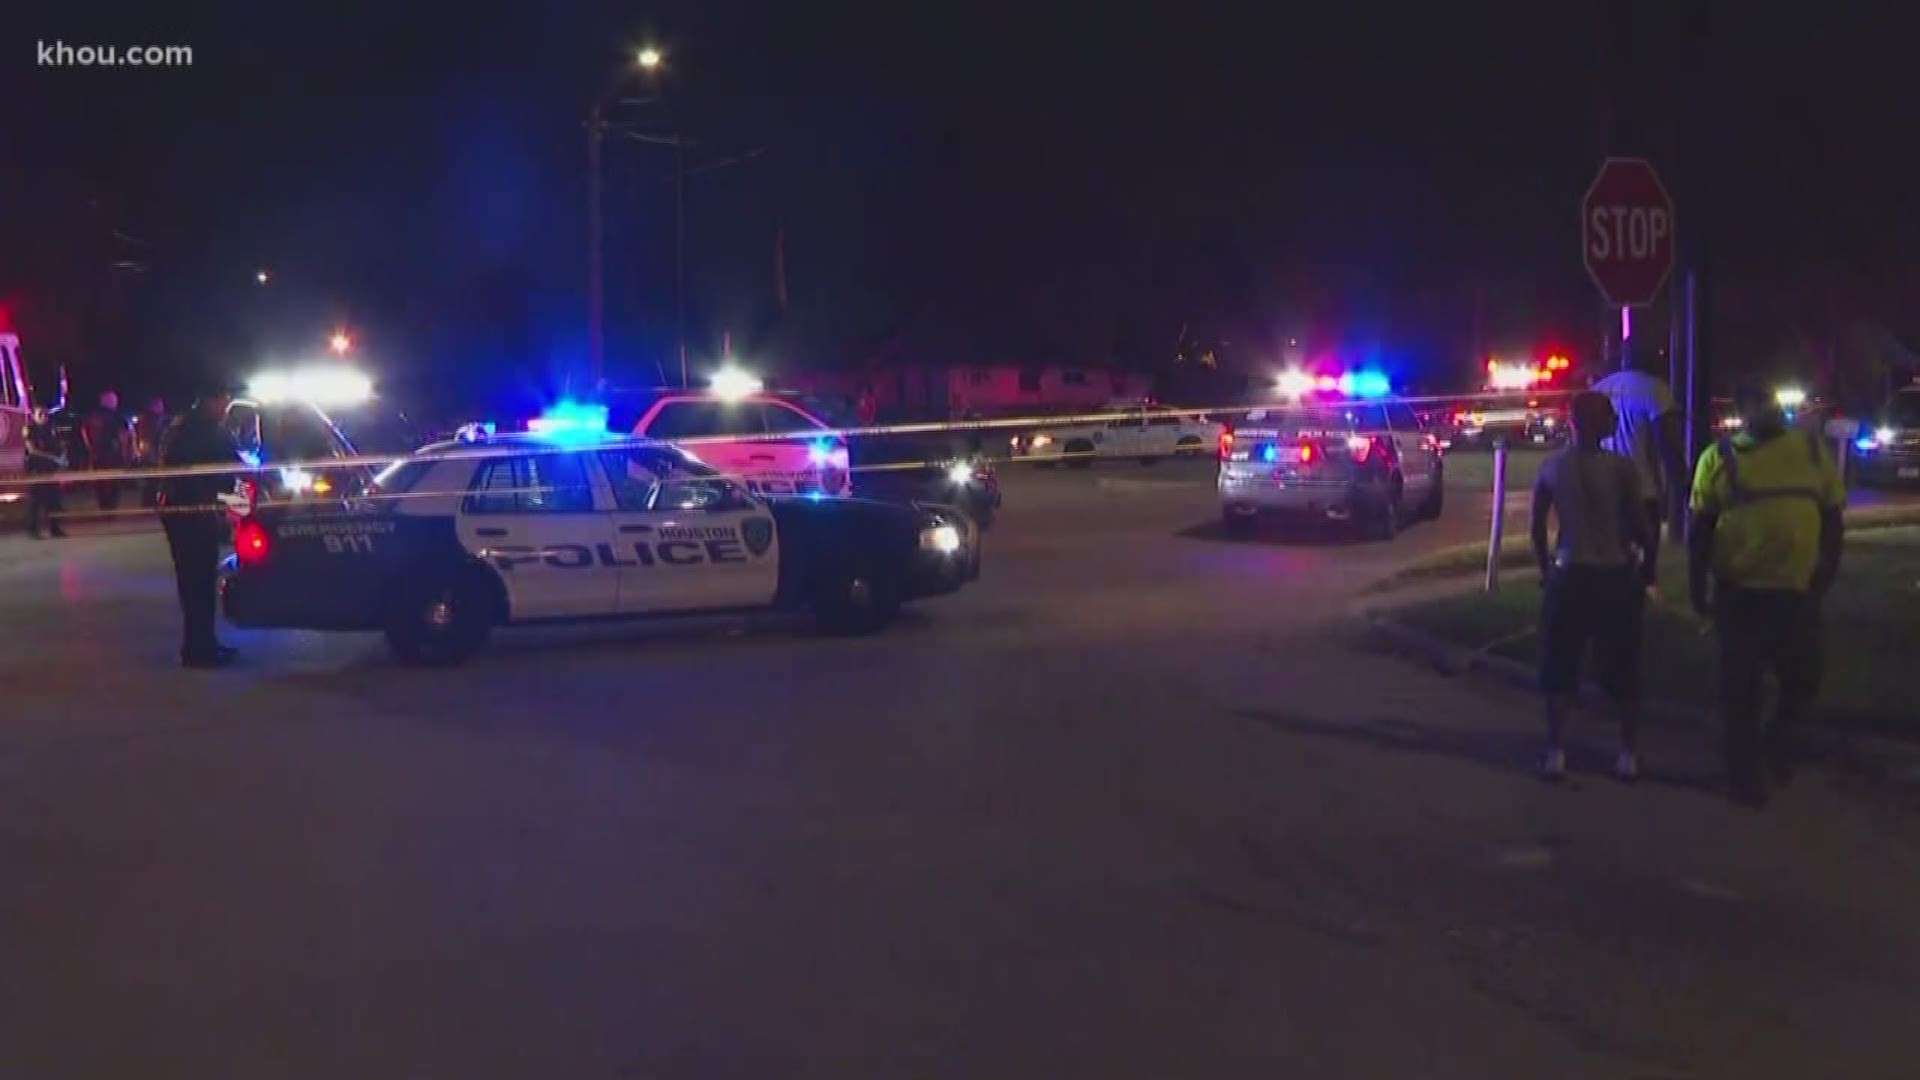 KHOU 11 is investigating why it took medics more than 15 minutes to arrive at Tuesday’s fatal crash between a Houston Police Department cruiser and cyclist.